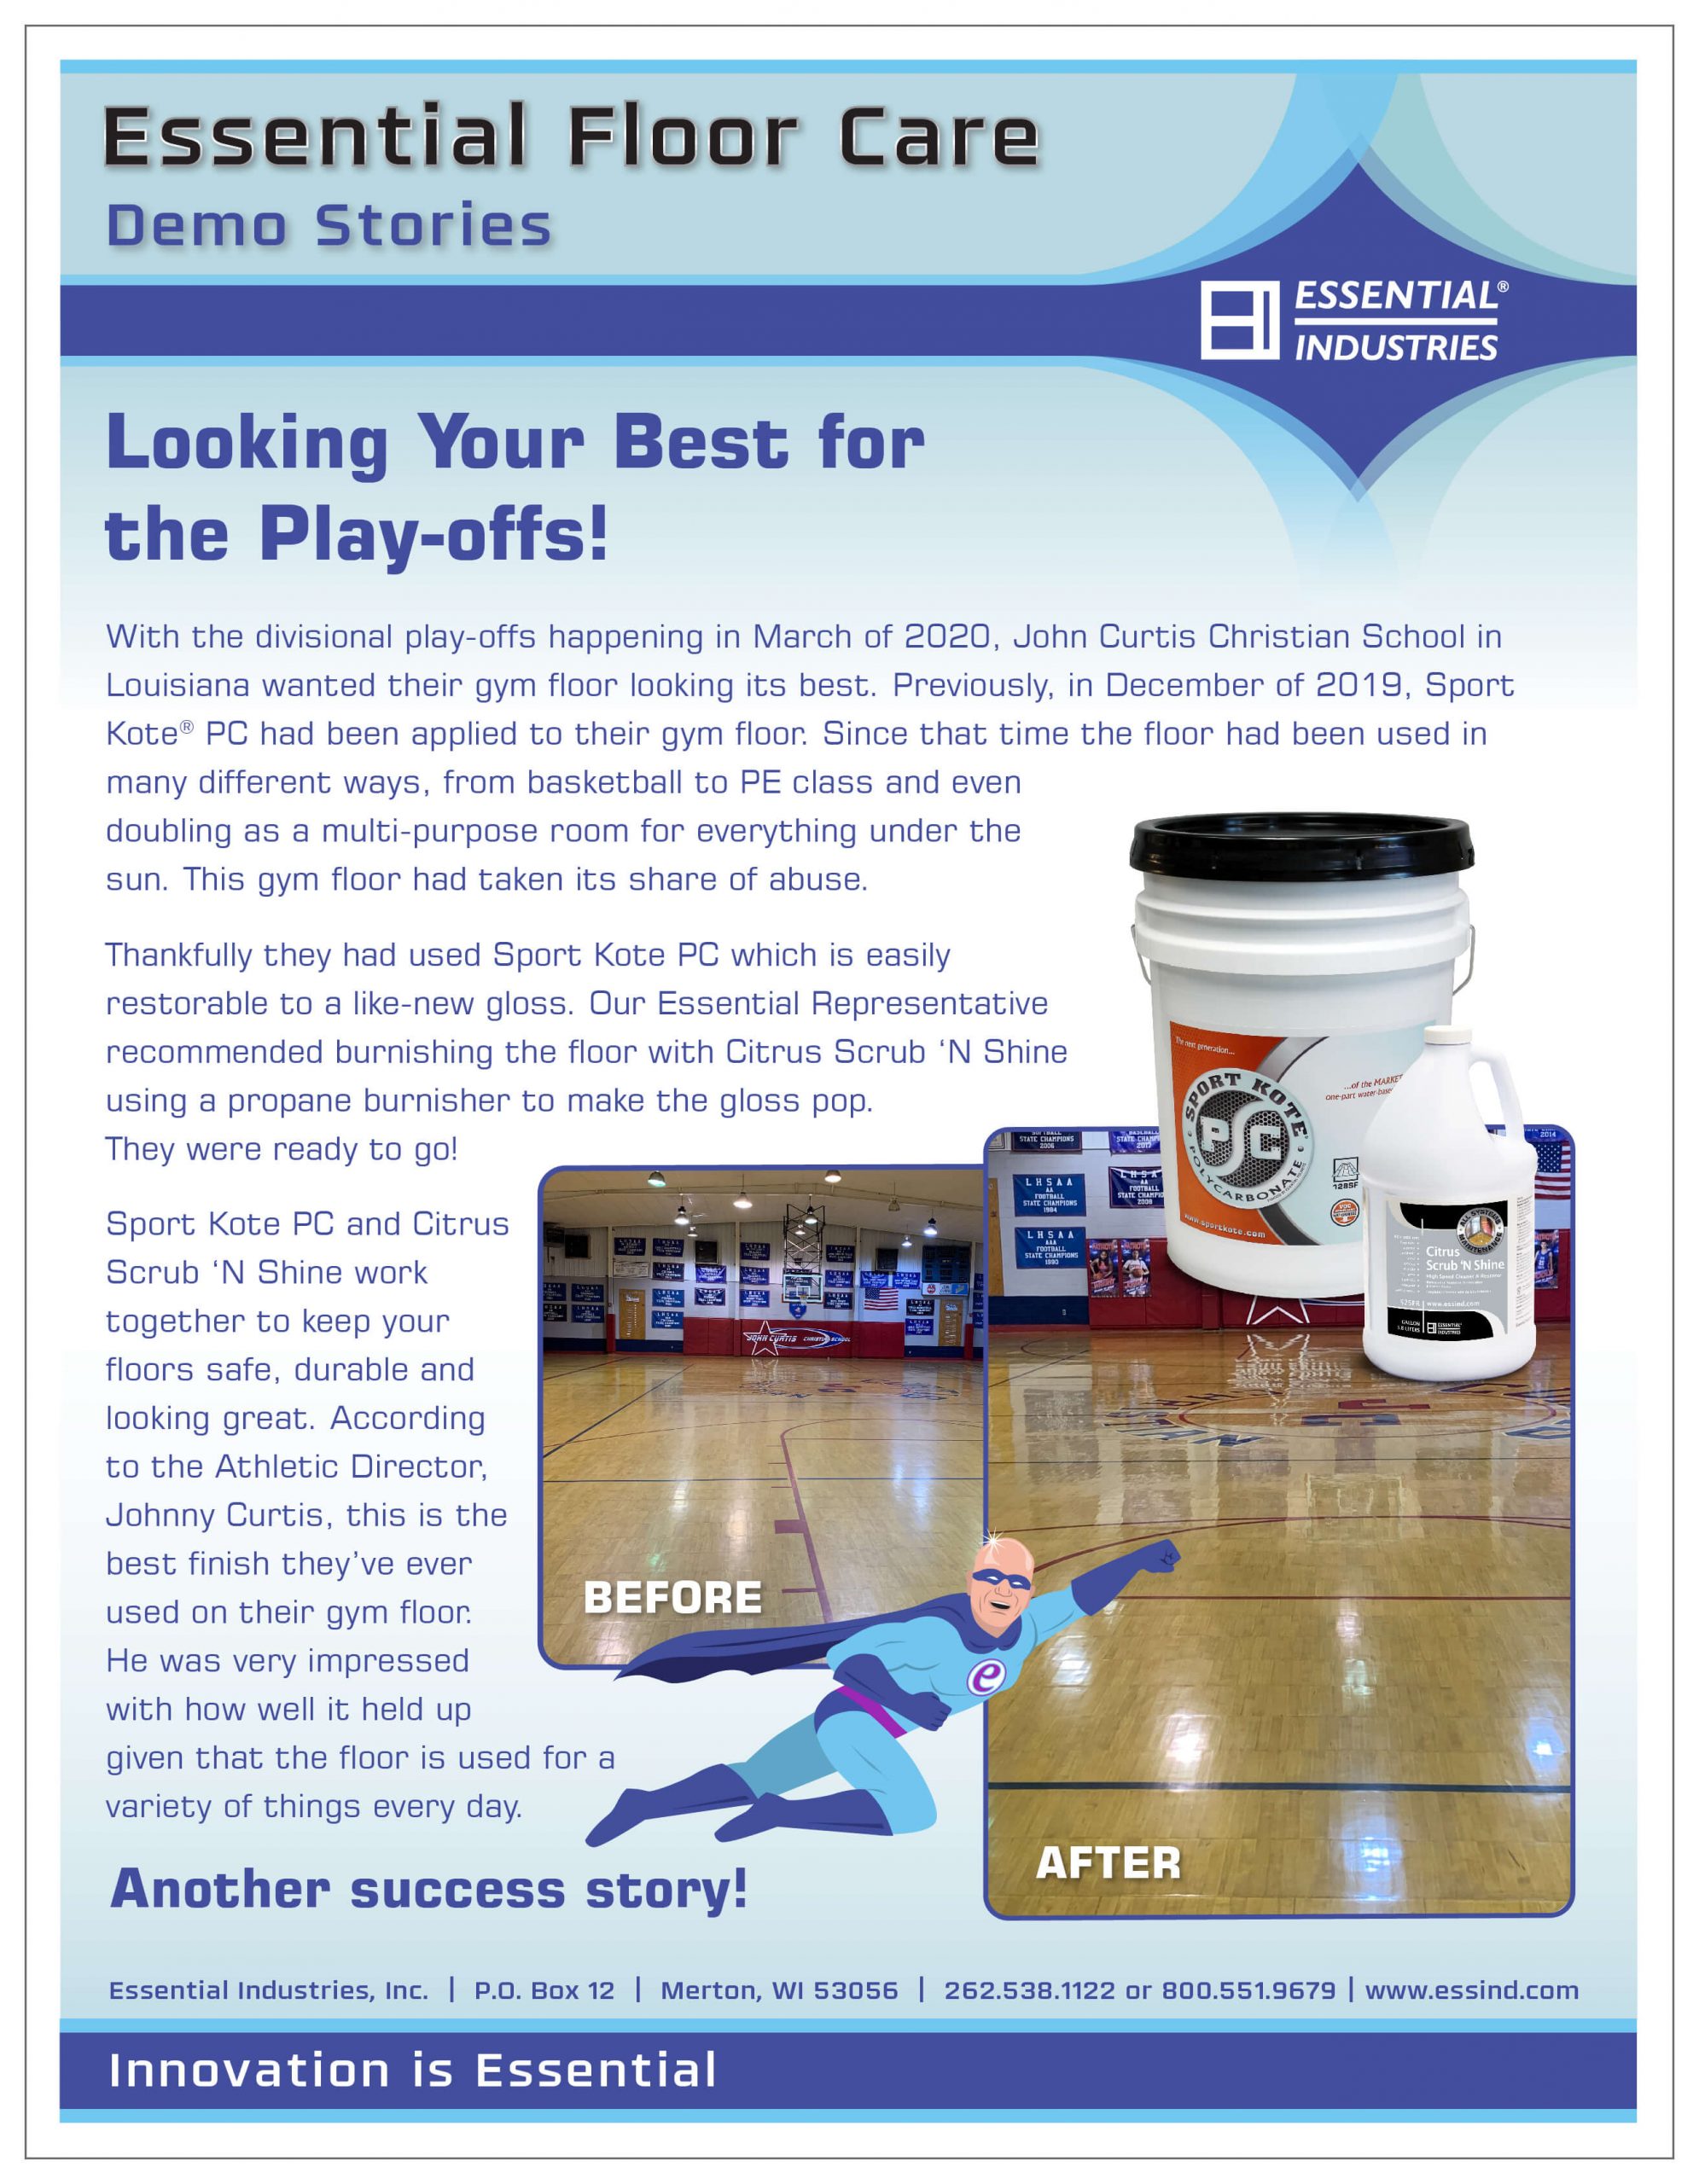 Looking Your Best for the Play-offs! With the divisional play-offs happening in March of 2020, John Curtis Christian School in Louisiana wanted their gym floor looking its best. Previously, in December of 2019, Sport Kote® PC had been applied to their gym floor. Since that time the gym floor had been used in many different ways, from basketball to PE class and even doubling as a multi-purpose room for everything under the sun. This gym floor had taken its share of abuse. Thankfully they had used Sport Kote PC which is easily restorable to a like-new gloss. Our Essential Representative recommended burnishing the floor with Citrus Scrub ‘N Shine using a propane burnisher to make the gloss pop. They were ready to go! Sport Kote PC and Citrus Scrub ‘N Shine work together to keep your floors safe, durable and looking great. According to the Athletic Director, Johnny Curtis, this is the best finish they’ve ever used on their gym floor. He was very impressed with how well it held up given that the floor is used for a variety of things every day. Another success story!